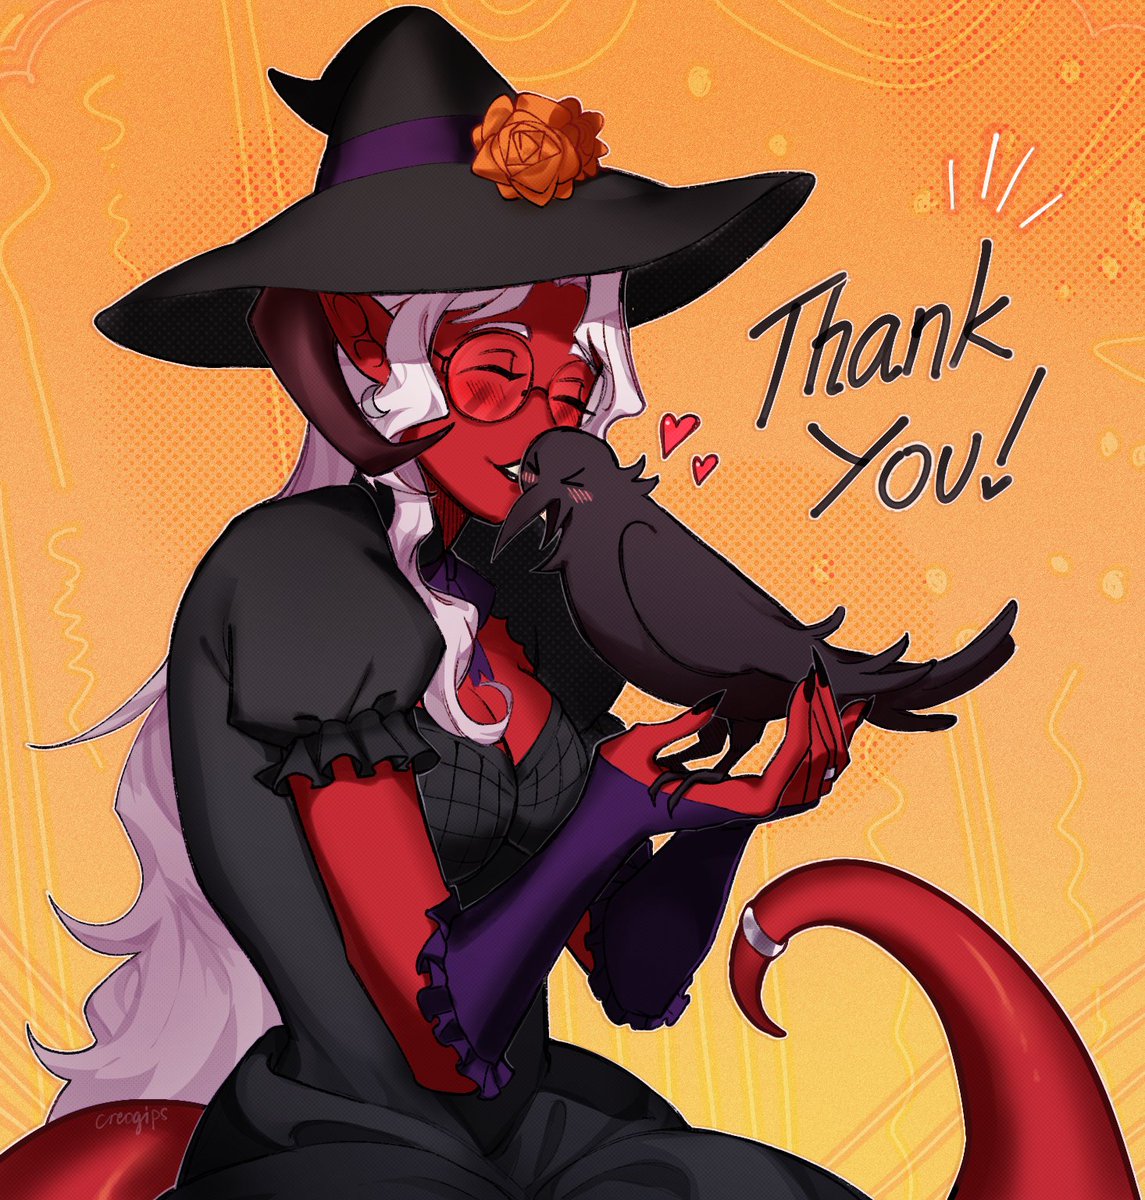 January was utter misery for all of us D&D creators, but we fought for what we believed in and ultimately won. Thank you so much everyone for the overwhelming amount of support, I couldn't have lasted this long without all of you having my back ❤️
#OpenDnD #Tiefling #ArtMelissa